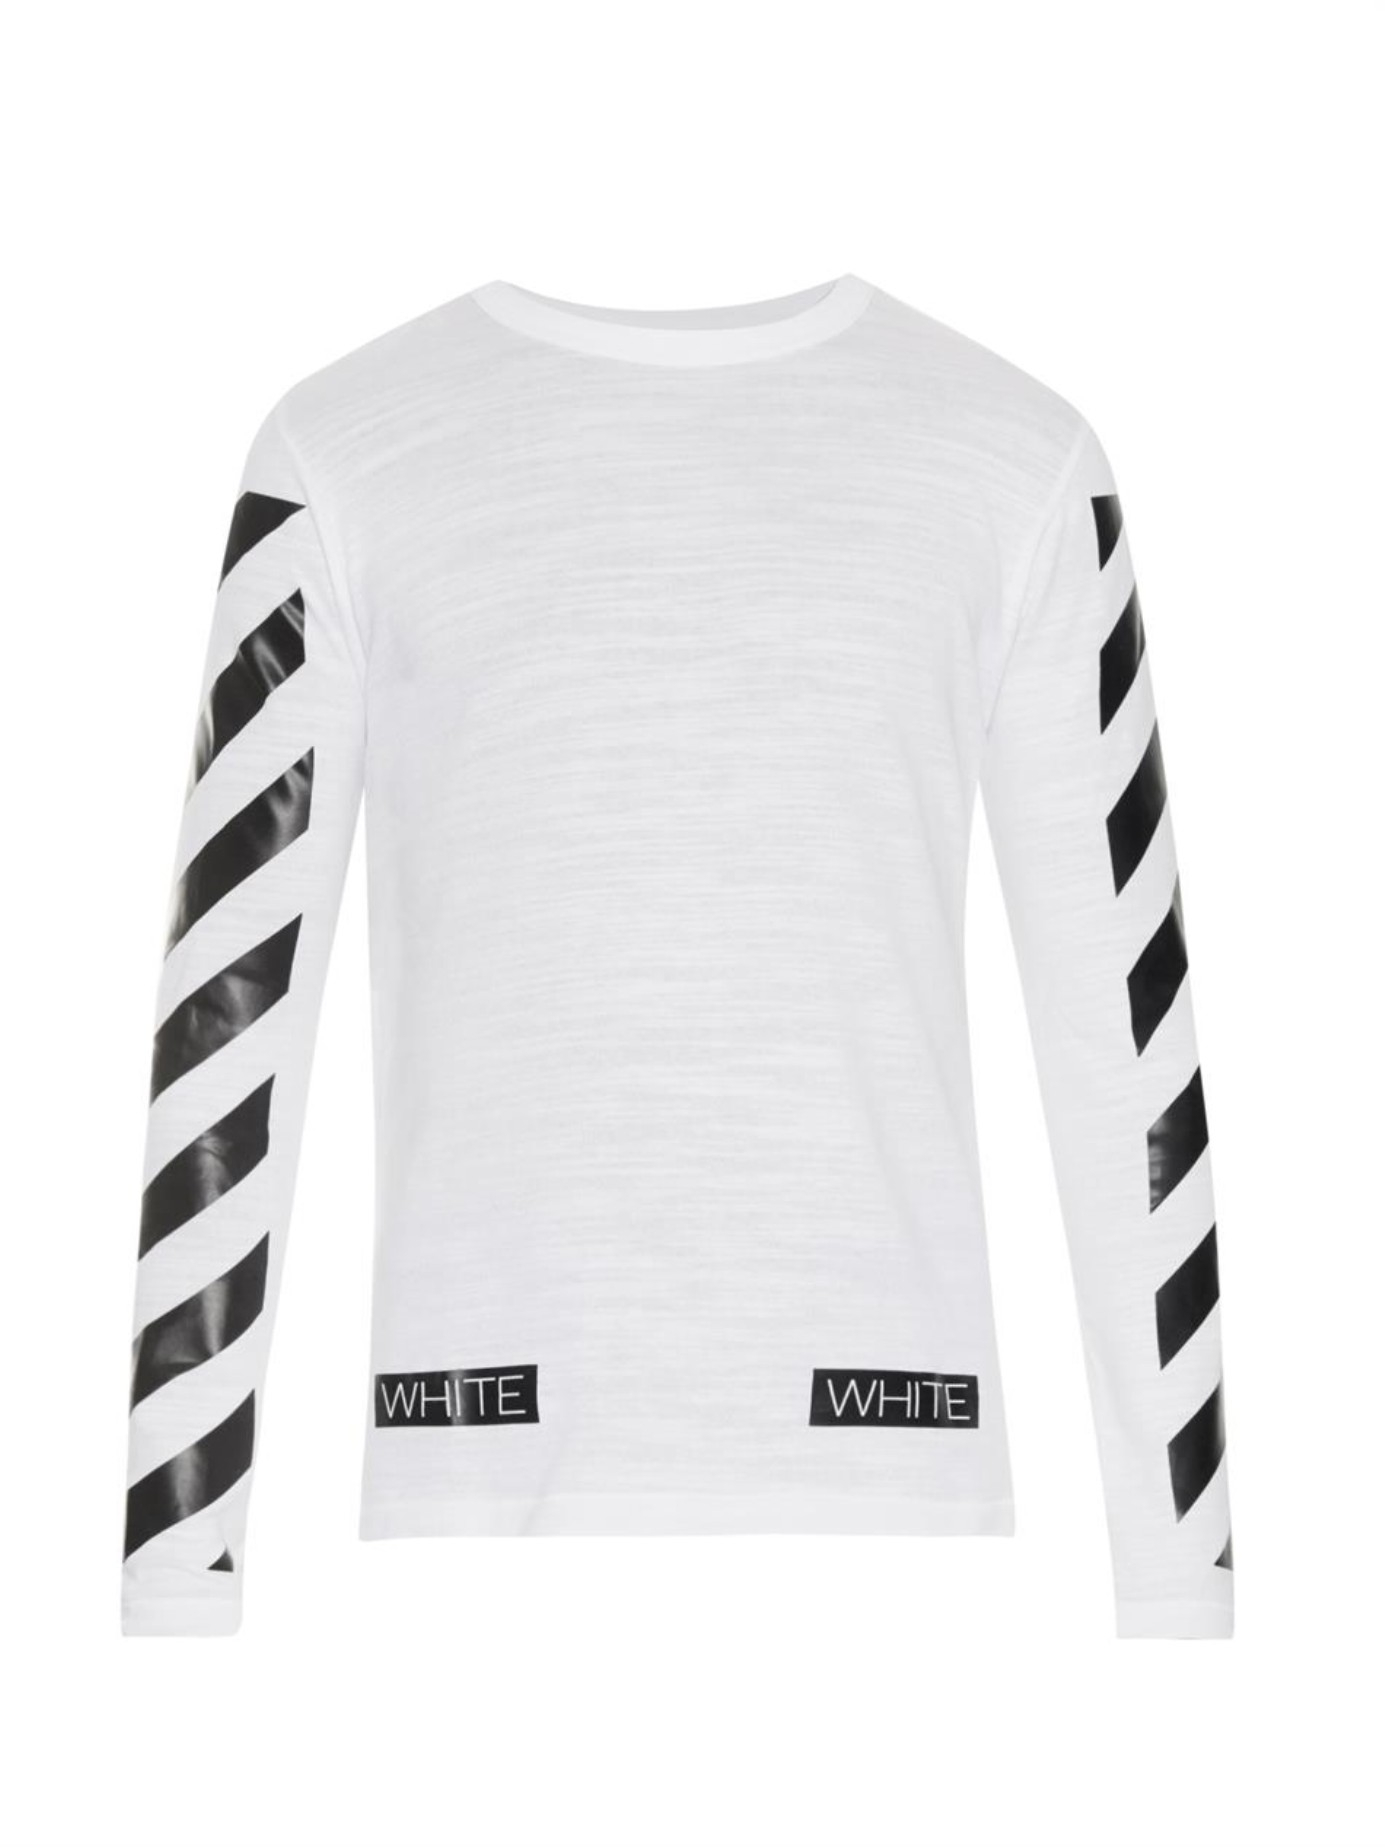 roblox off white shirt template